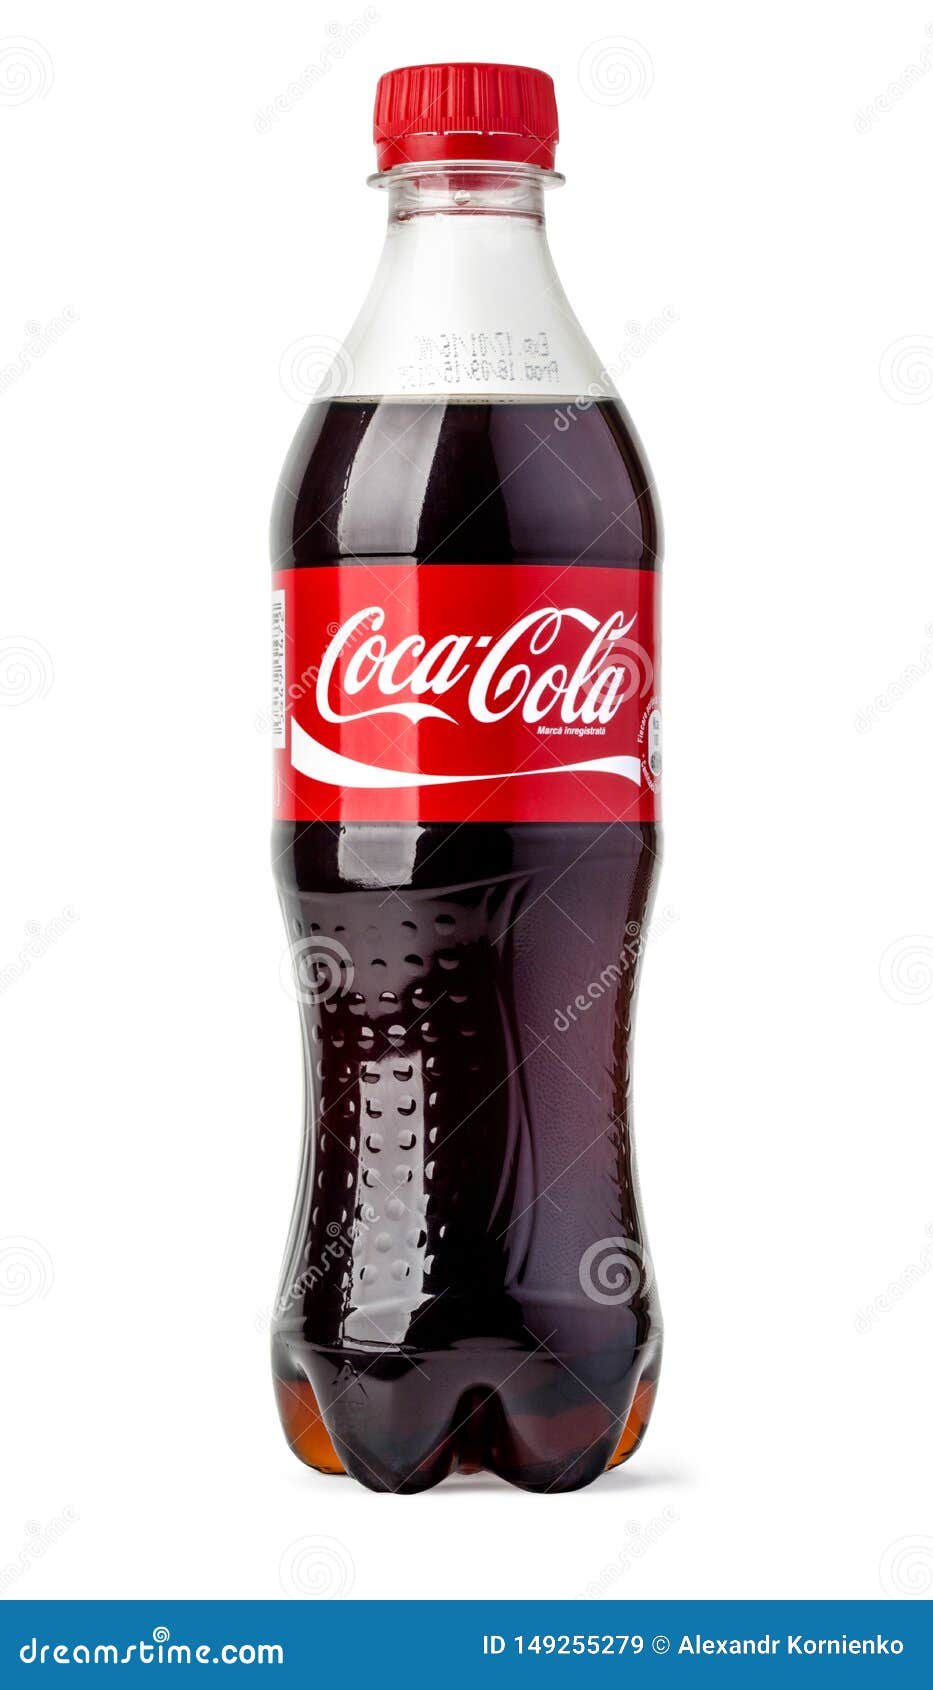 Download 1 253 Coca Cola Plastic Bottle Photos Free Royalty Free Stock Photos From Dreamstime Yellowimages Mockups